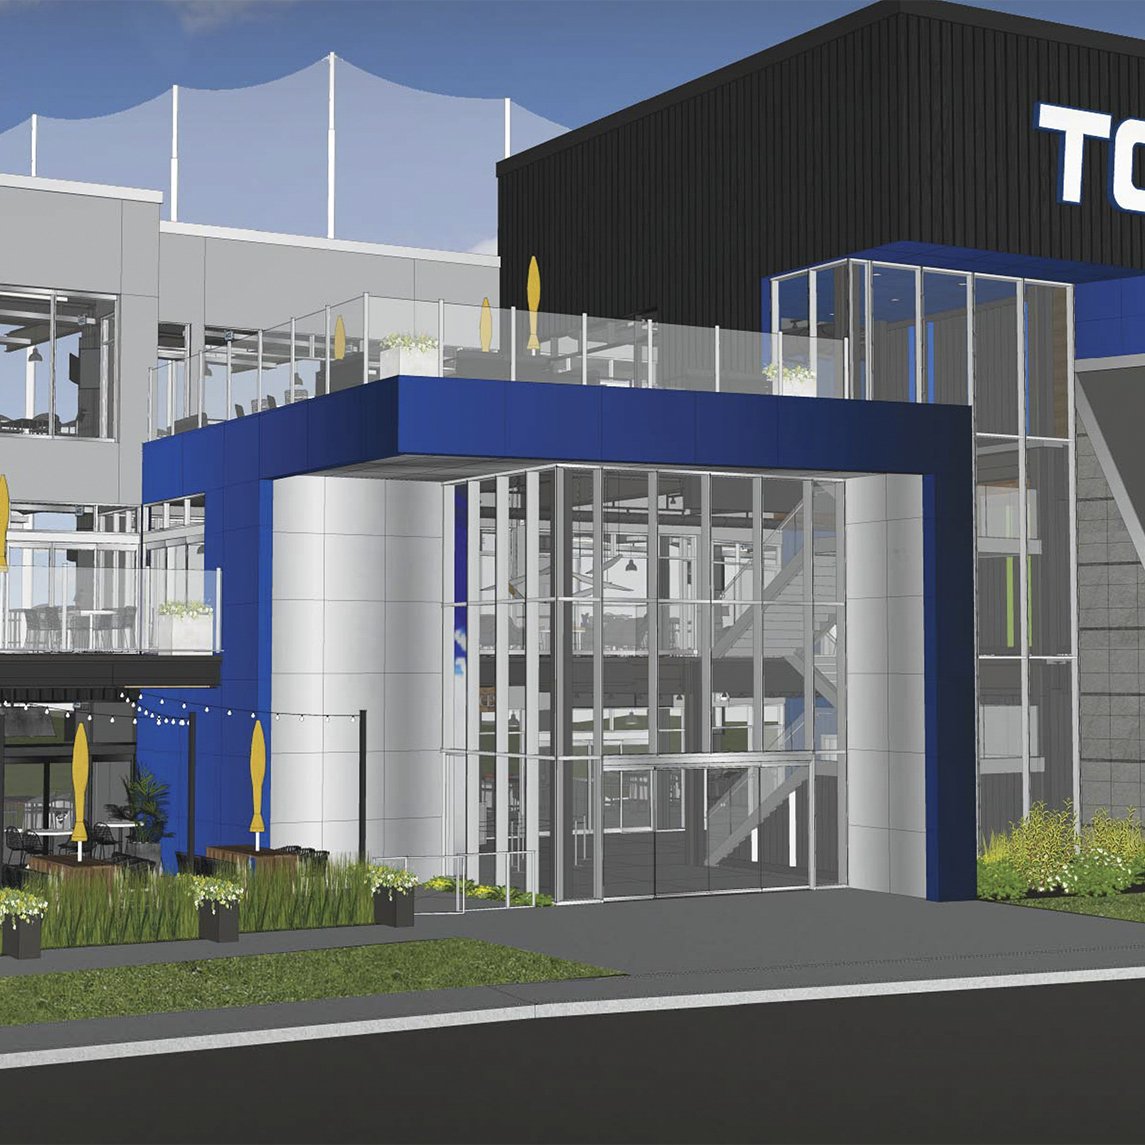 Topgolf San Diego: Plan to build high tech golf facility on waterfront  moving ahead